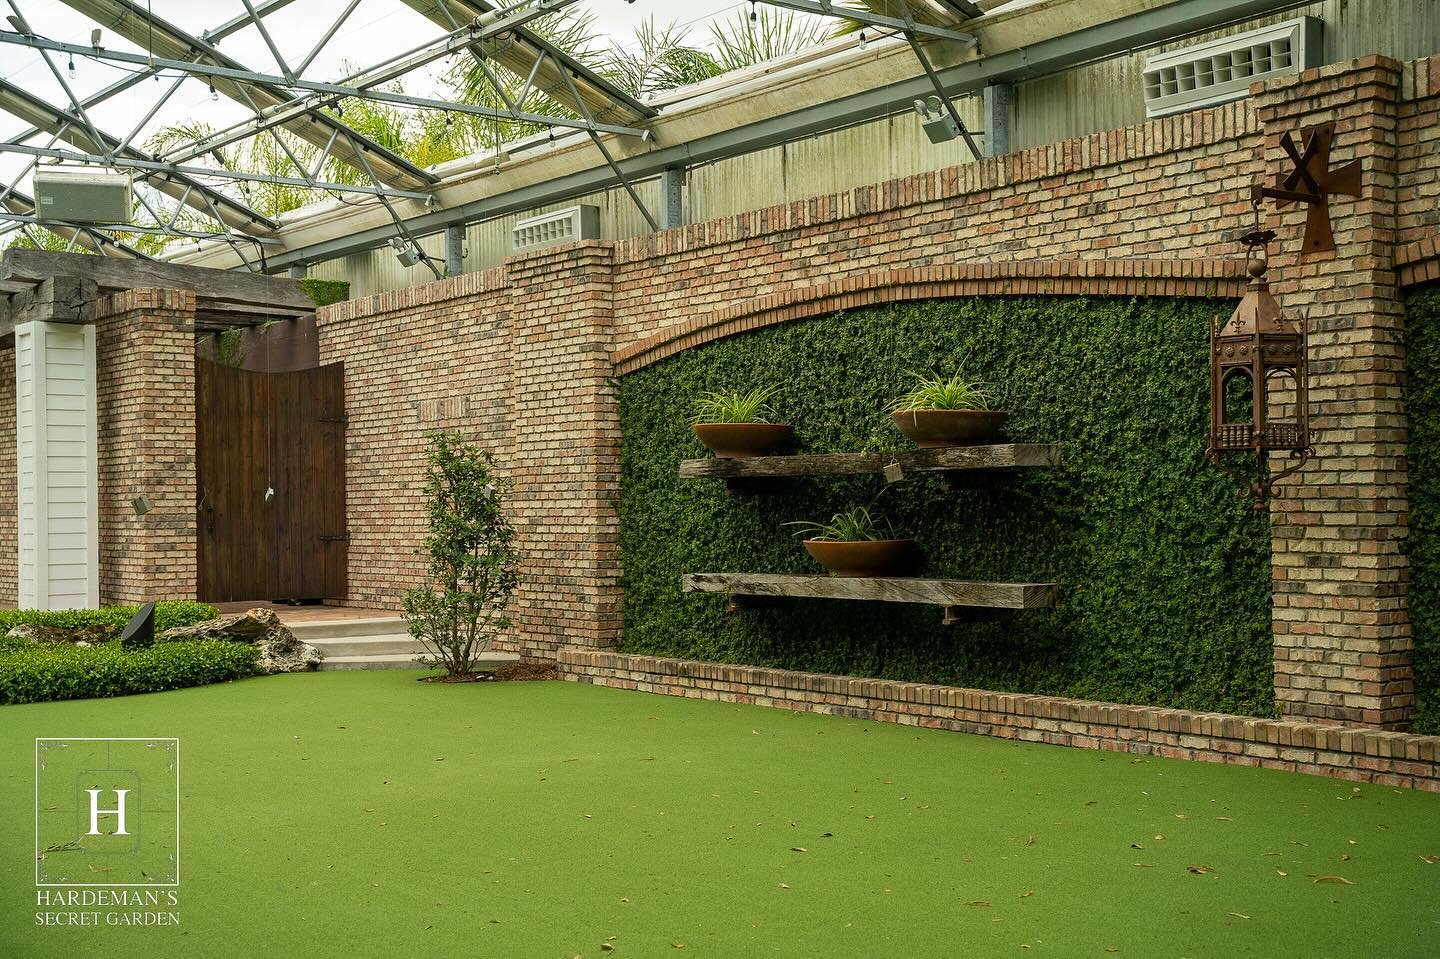 The Orchid House is a magnificent space for you to host your event! From parties, to receptions, this space is versatile enough to make your event memorable!

https://www.hardemanssecretgarden.com/
#hardemanssecretgarden #weddings #weddingreceptions 